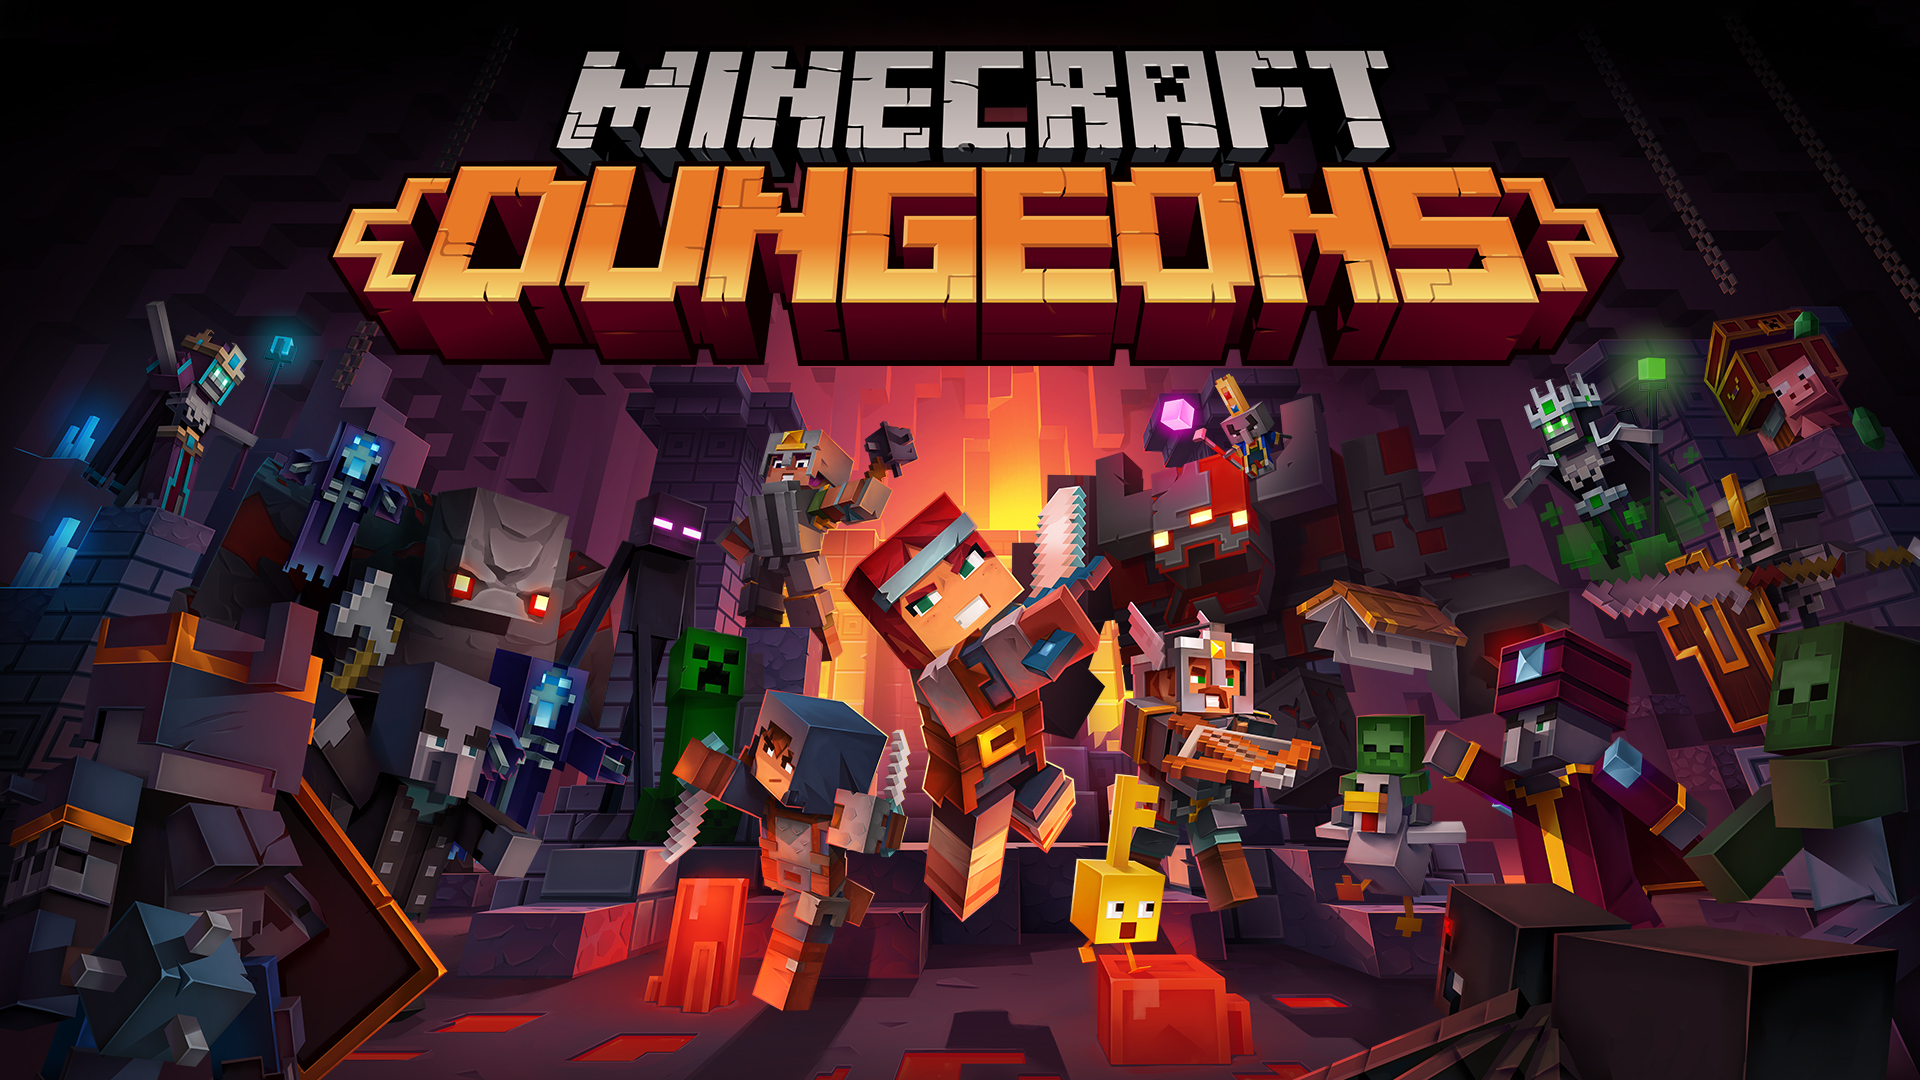 Minecraft Dungeons On Xbox Cloud Gaming Is Getting Touch Controls, Allowing Mobile Players To Play With Ease!